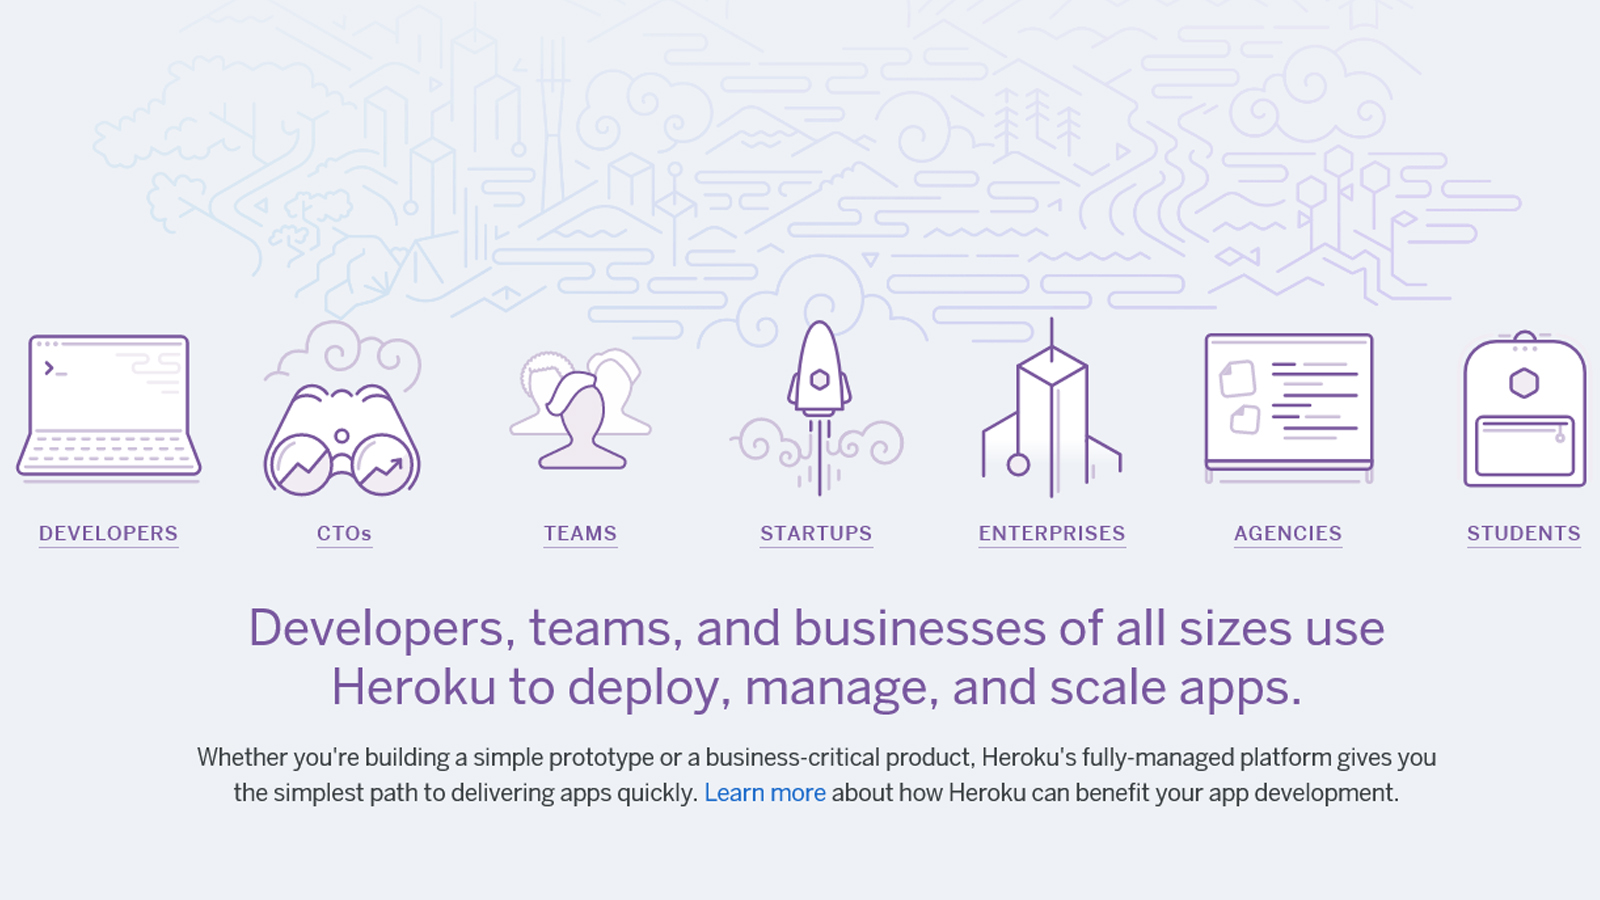 Find detailed information about Heroku